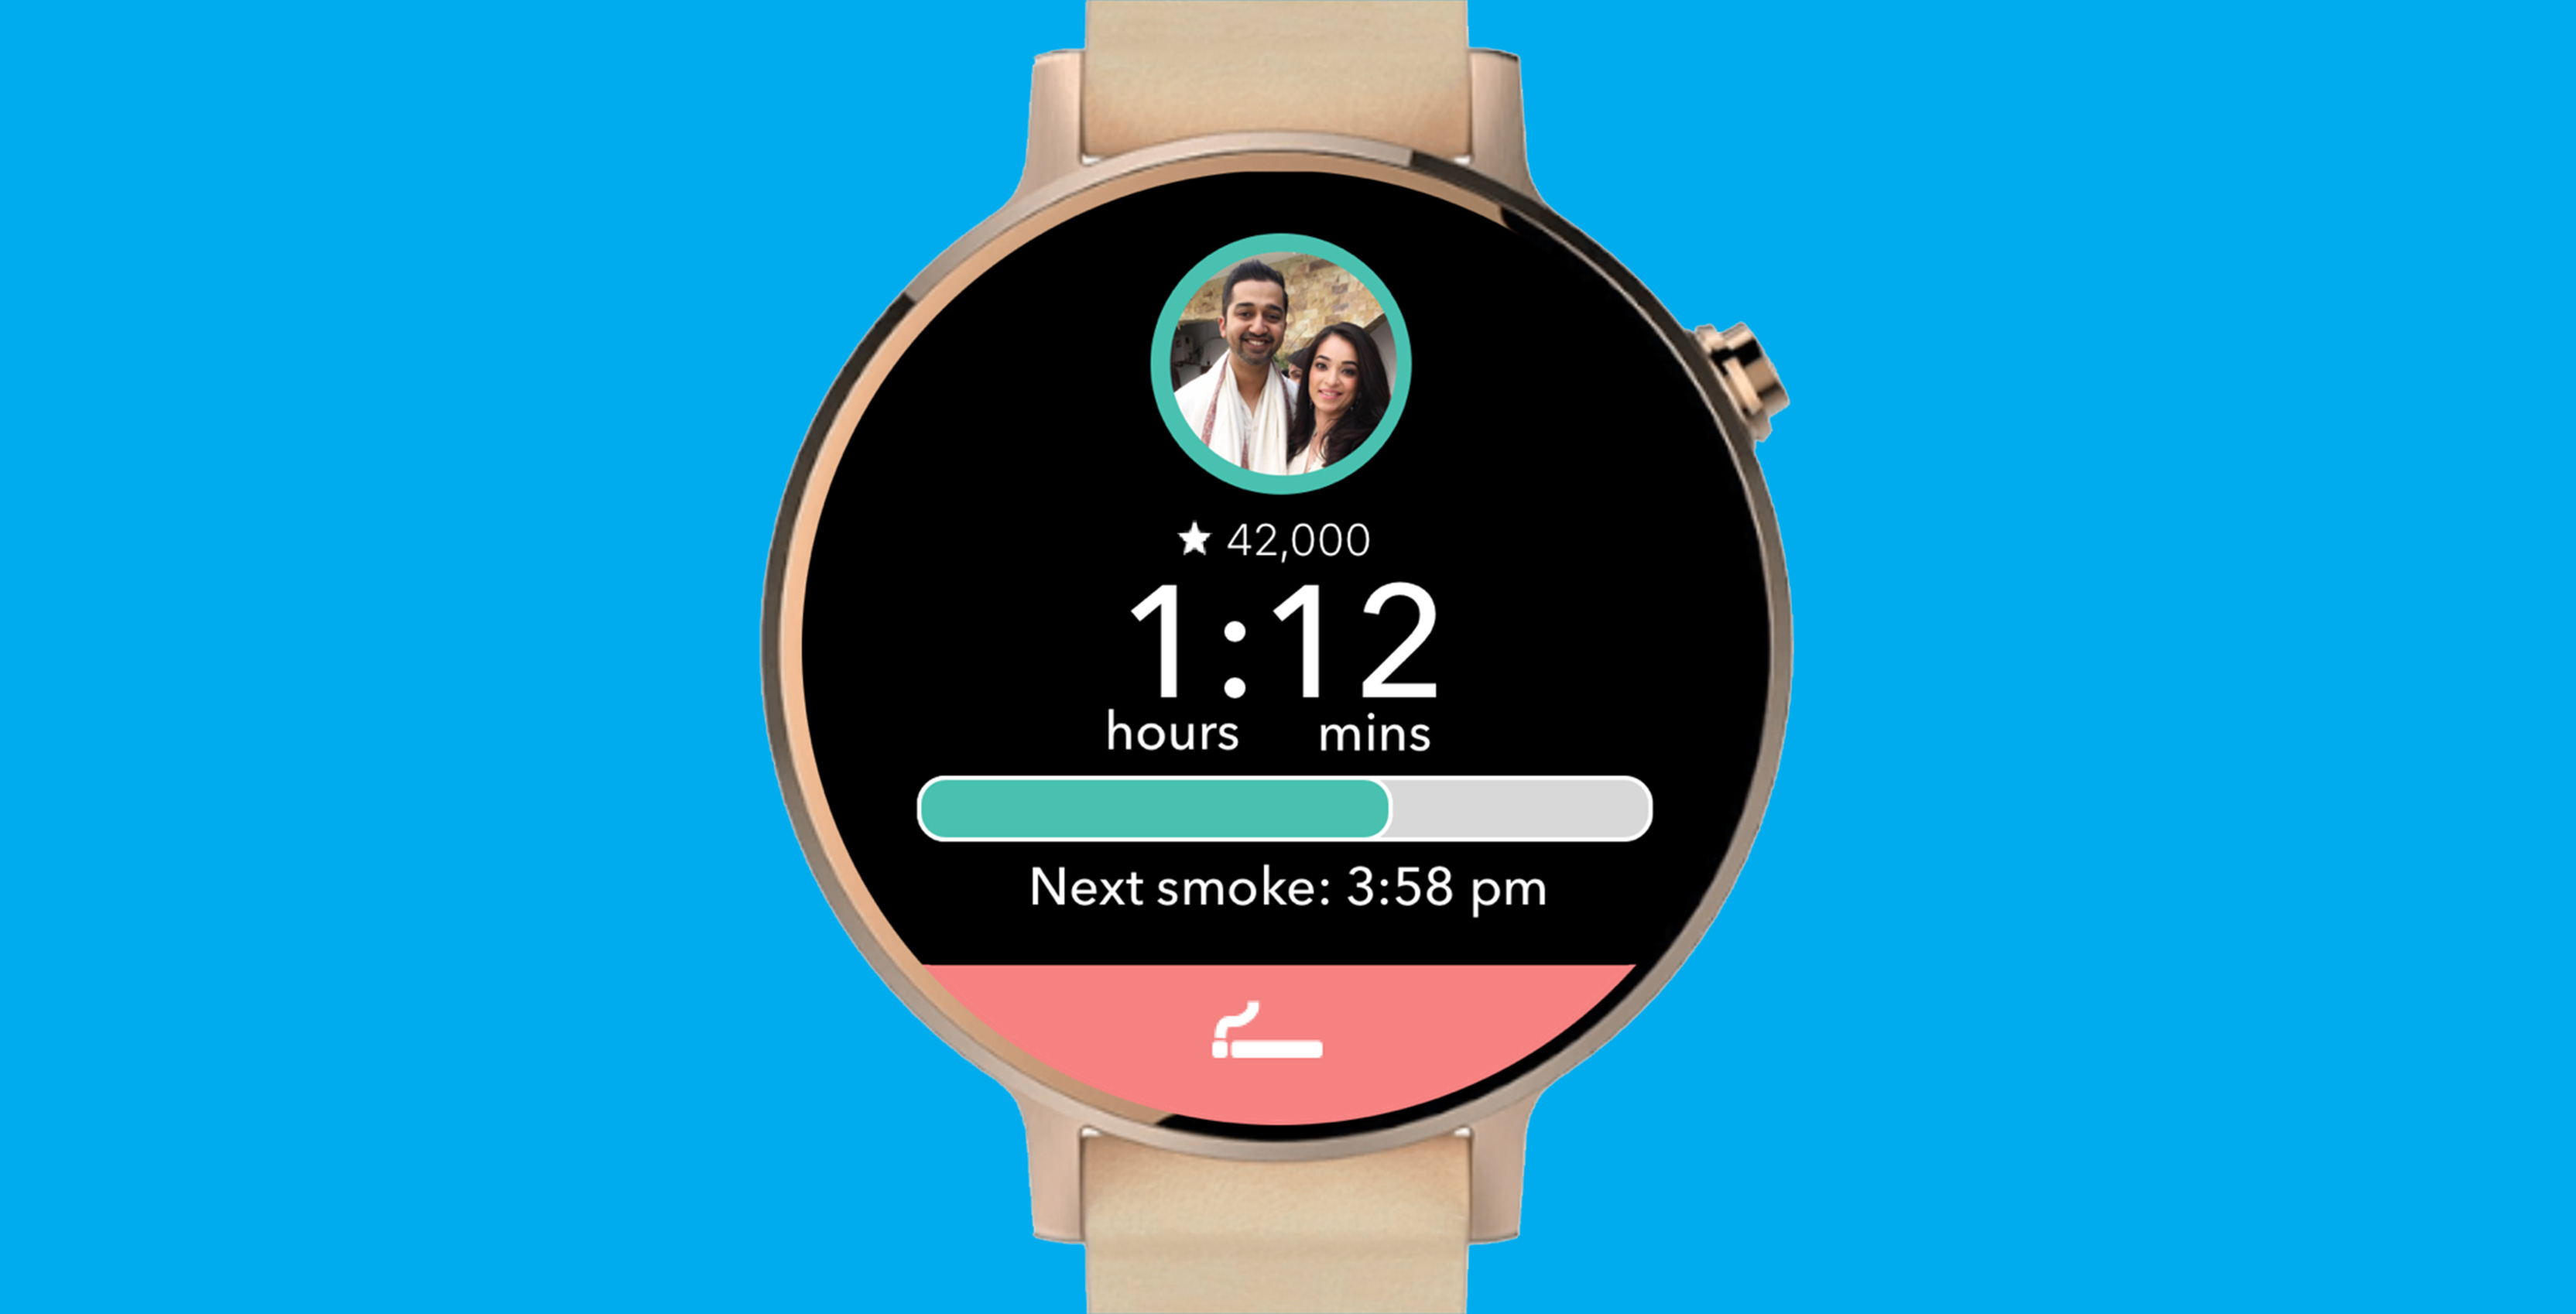 The Cue app will help you quit smoking